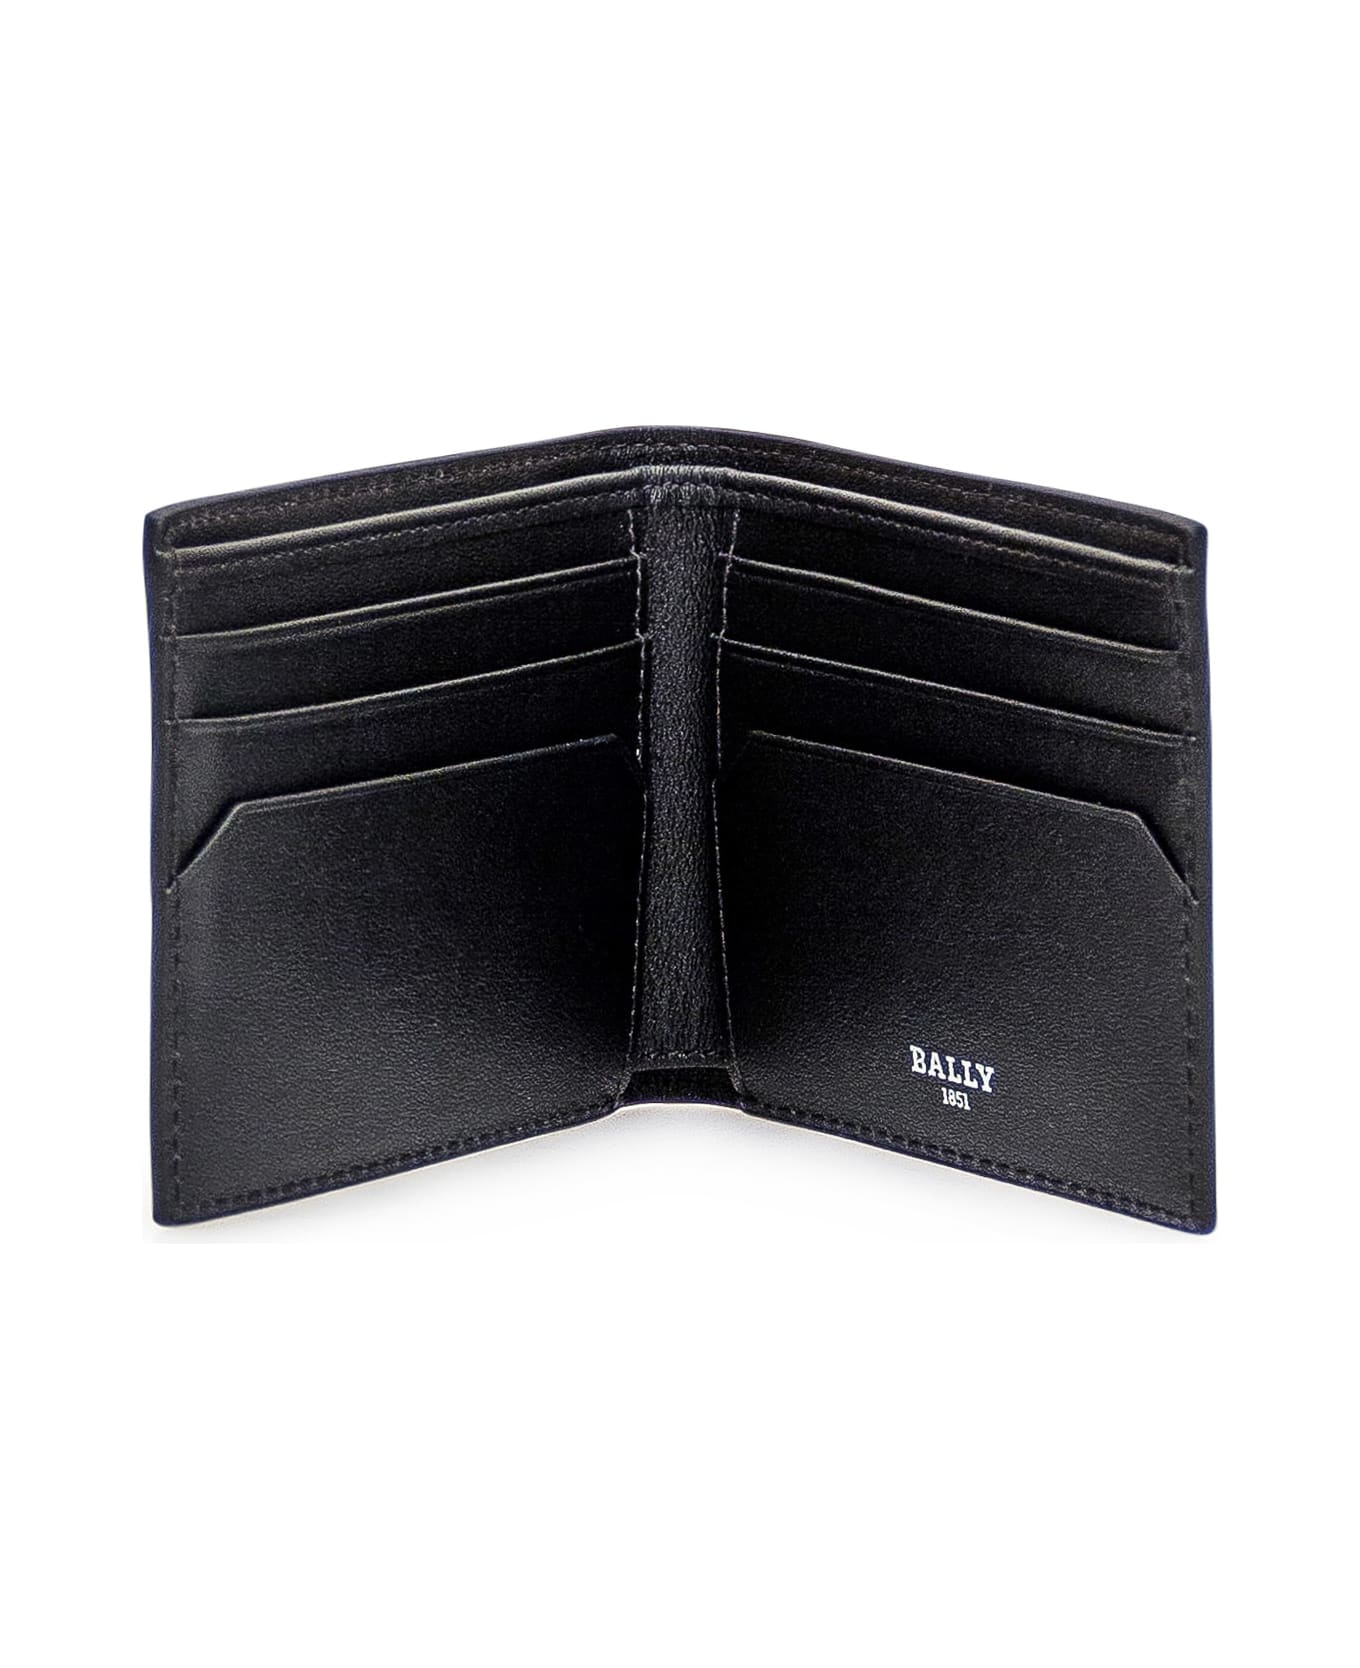 Bally Leather Wallet - BLACK